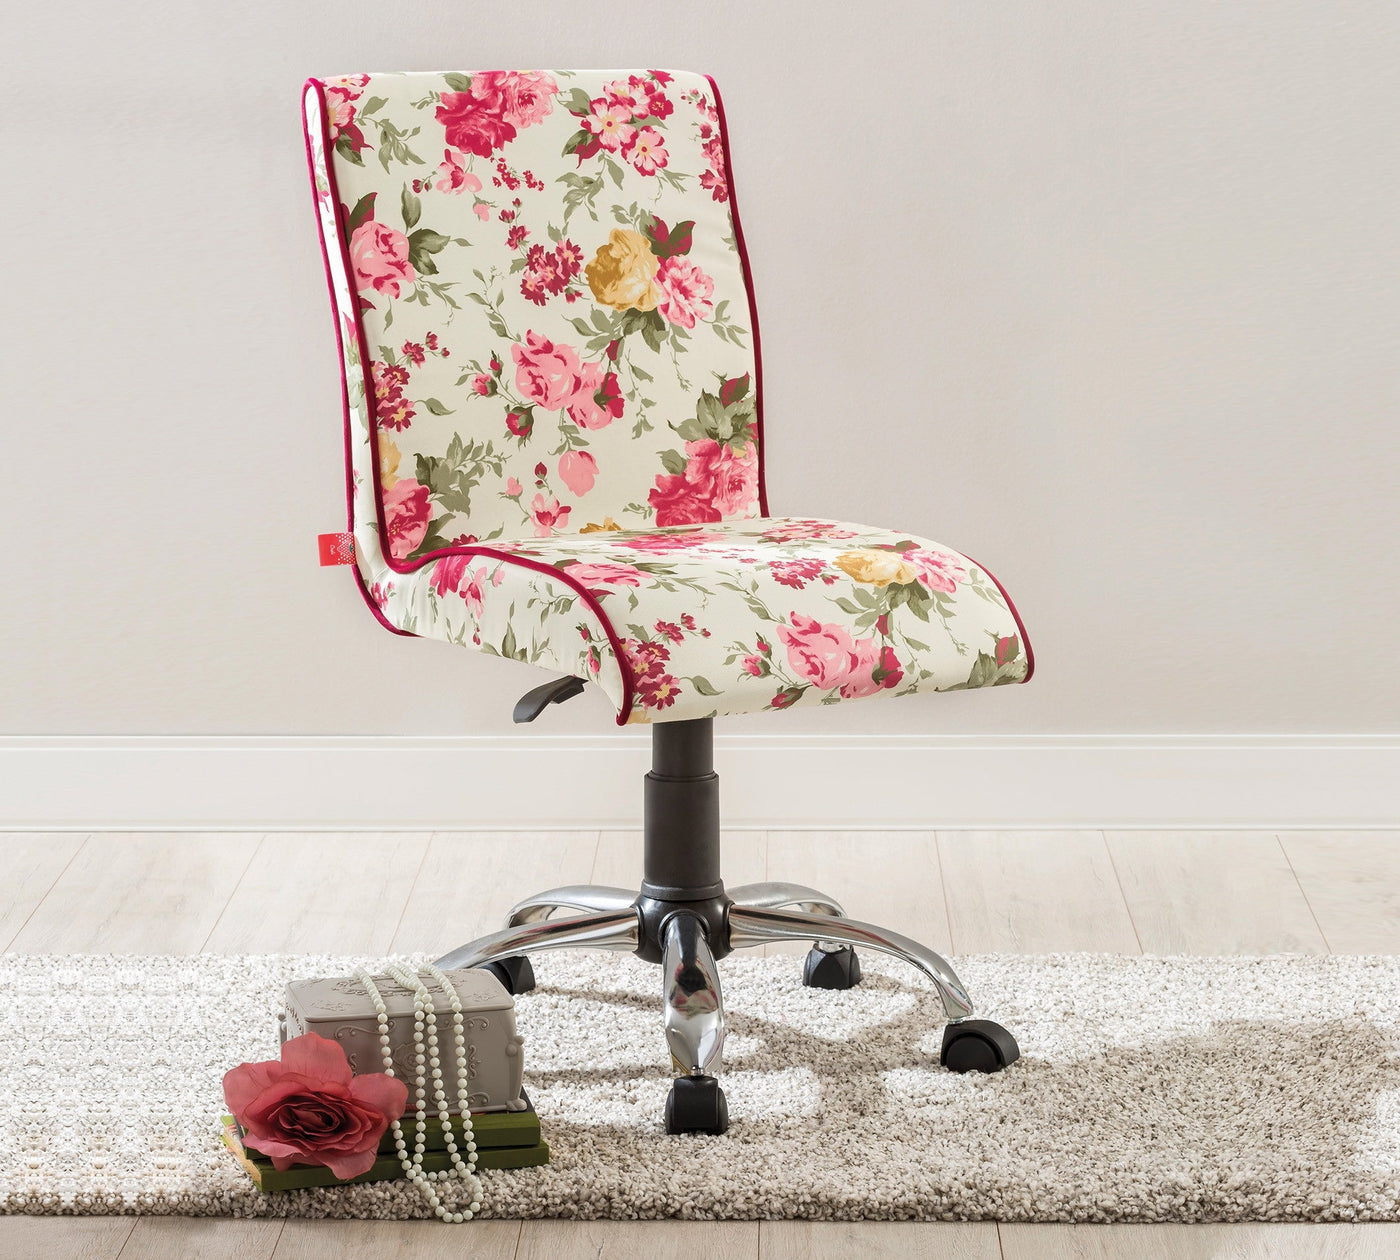 Soft Chair With Flower